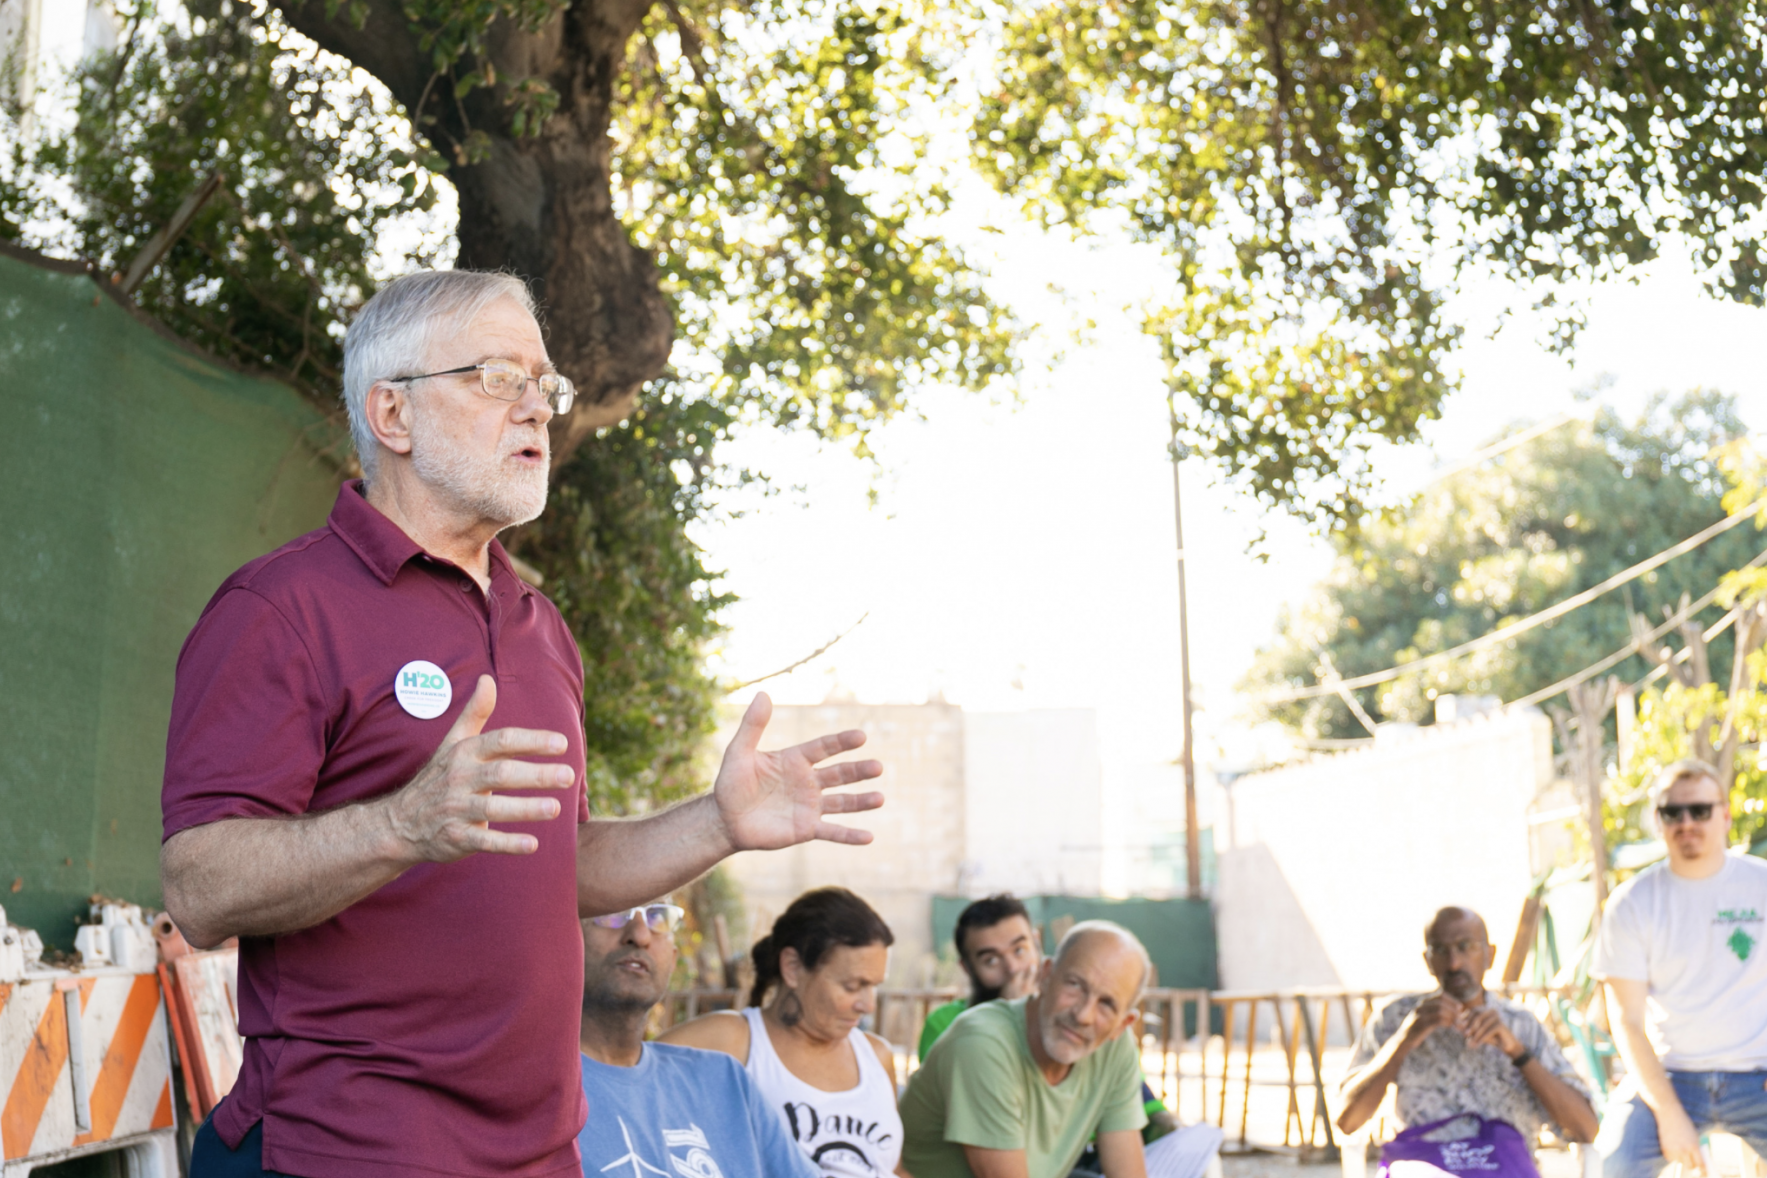 Howie Hawkins has entered the 2020 presidential race for the Green Party